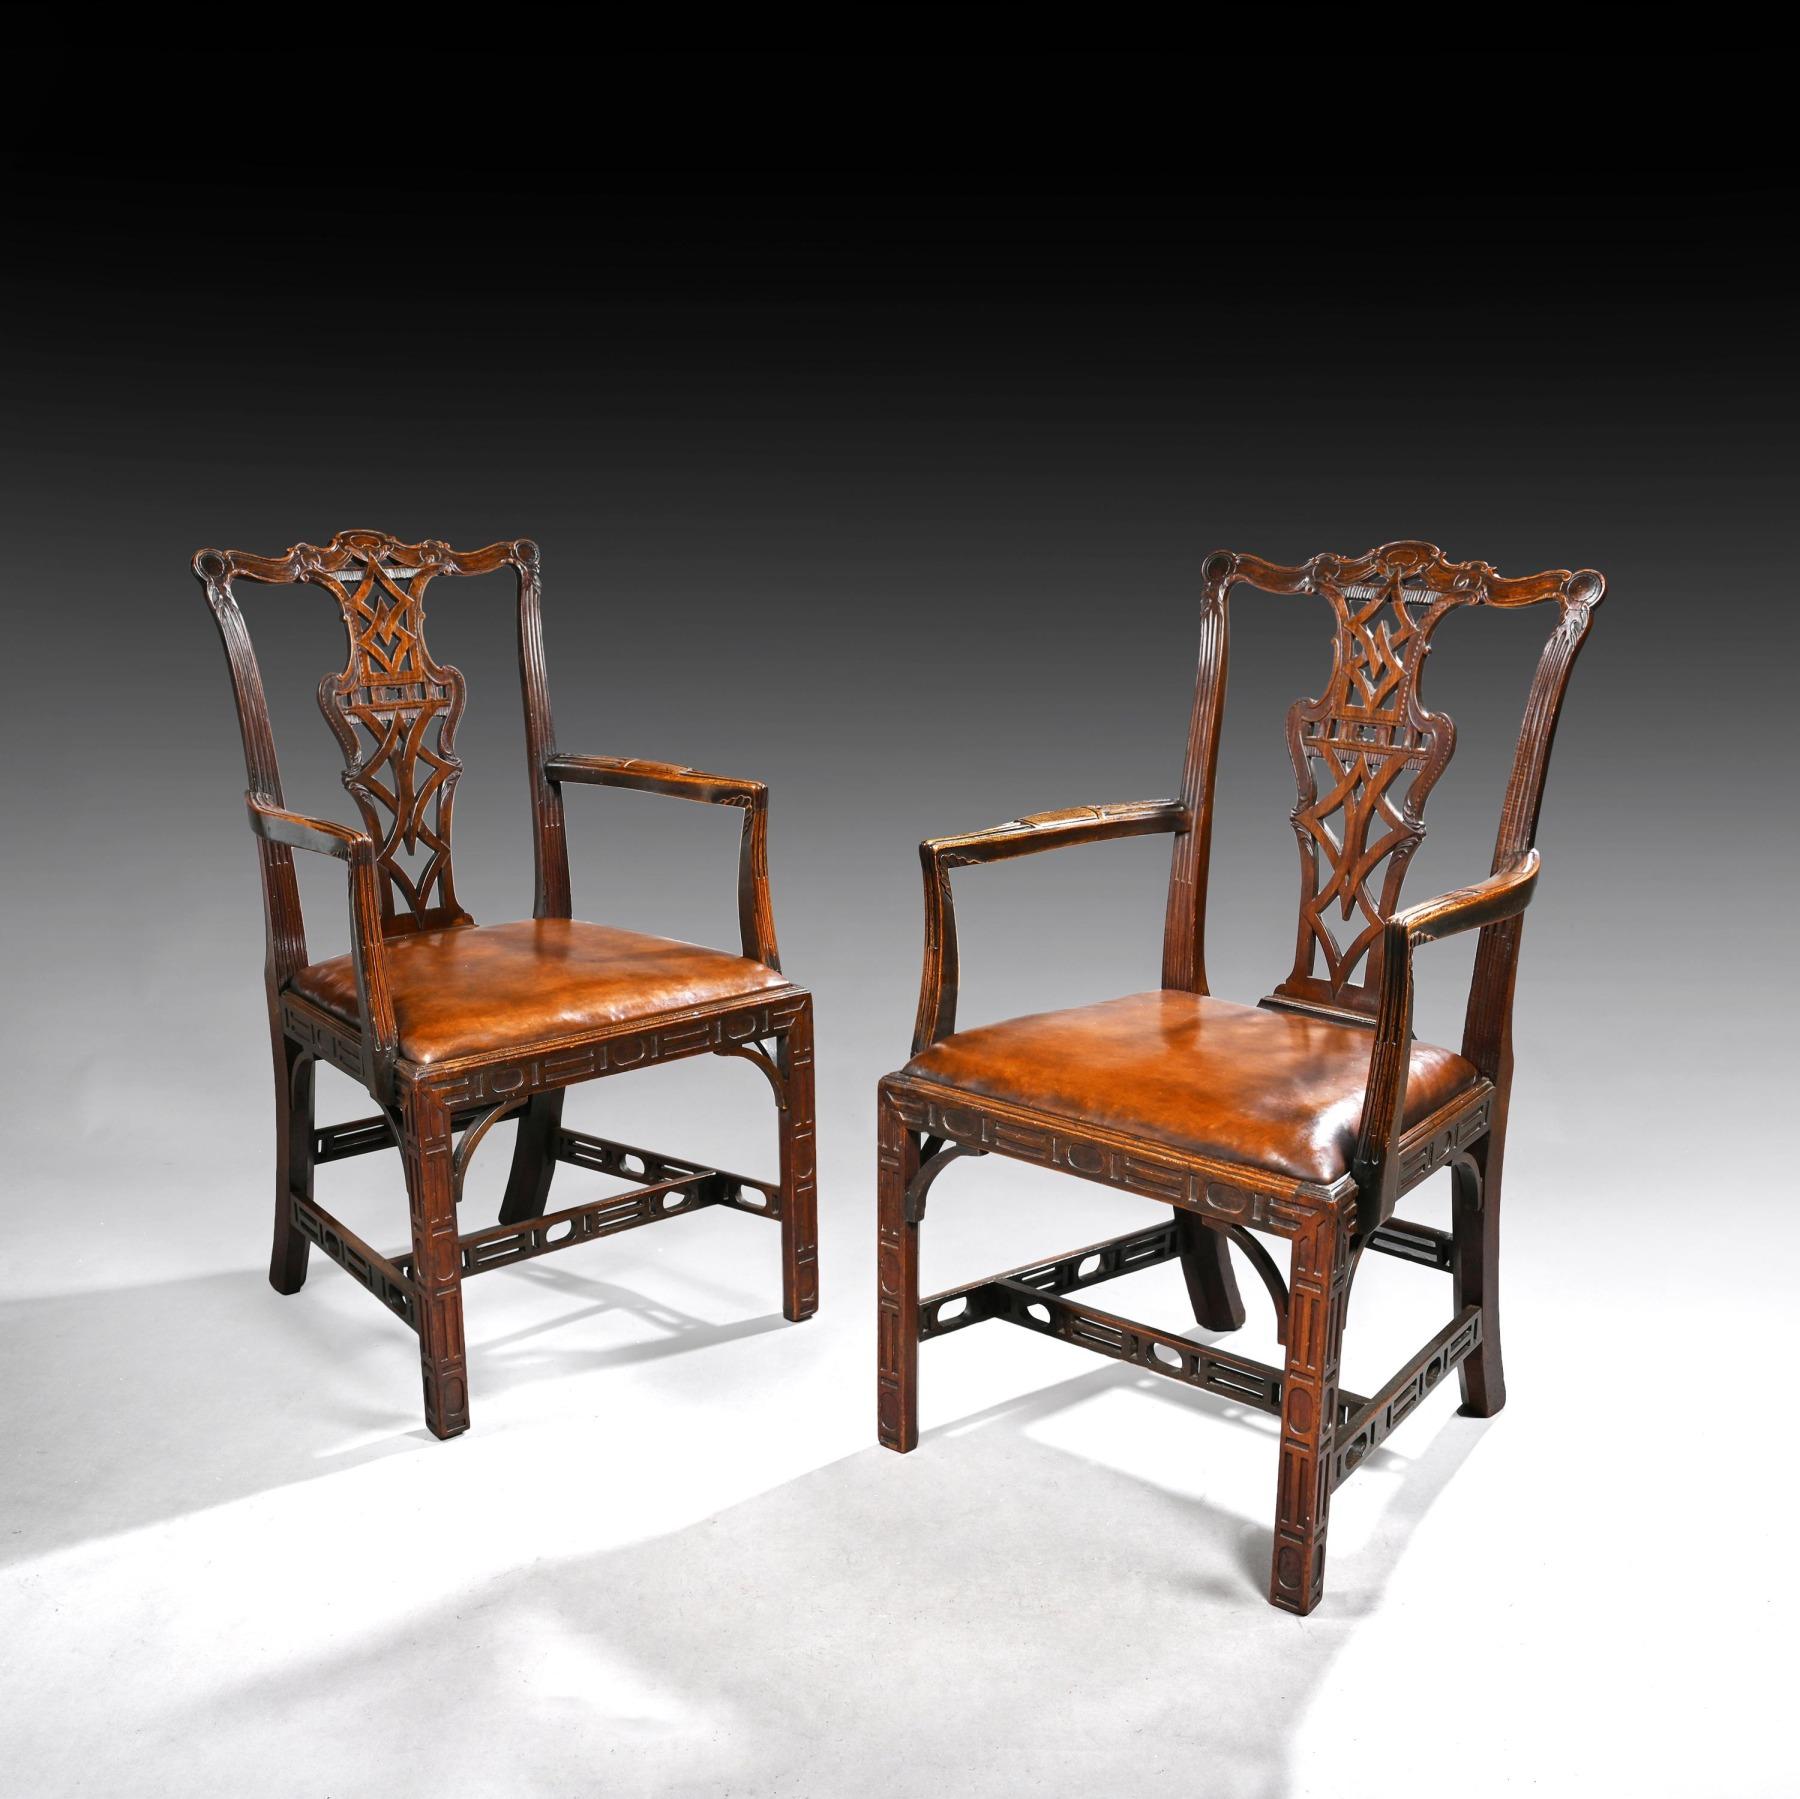 A fine pair of Chippendale style mahogany and leather armchairs with crisply carved back splats and pierced stretchers. 

English Circa, 1910.

These well designed armchairs are ascetically pleasing and the craftsman has used a very good choice